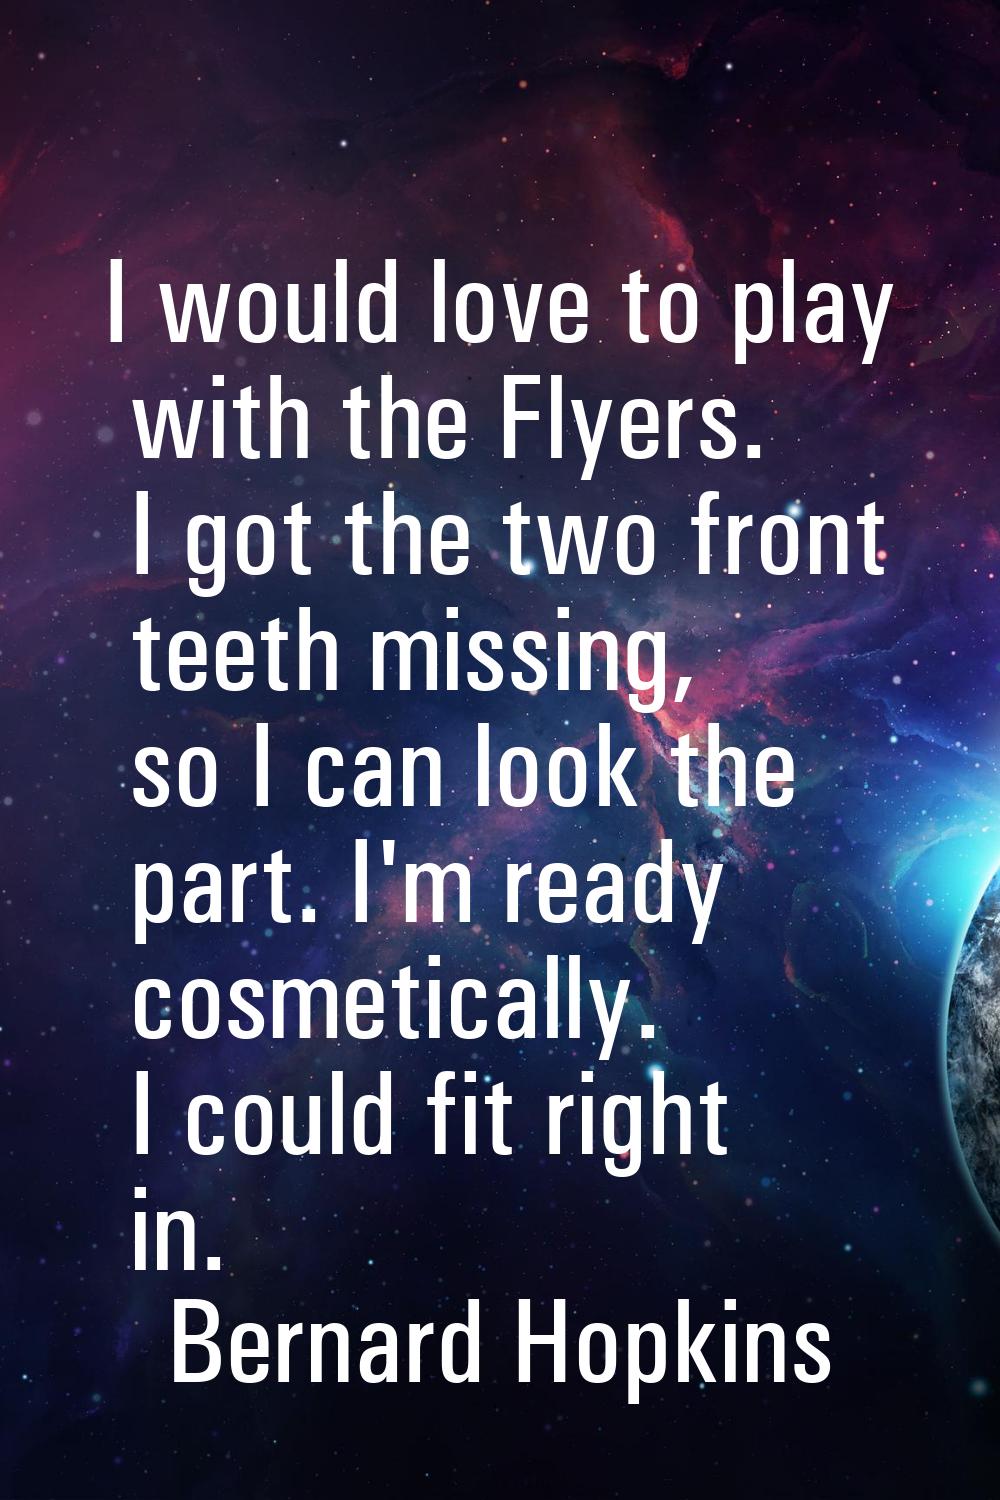 I would love to play with the Flyers. I got the two front teeth missing, so I can look the part. I'